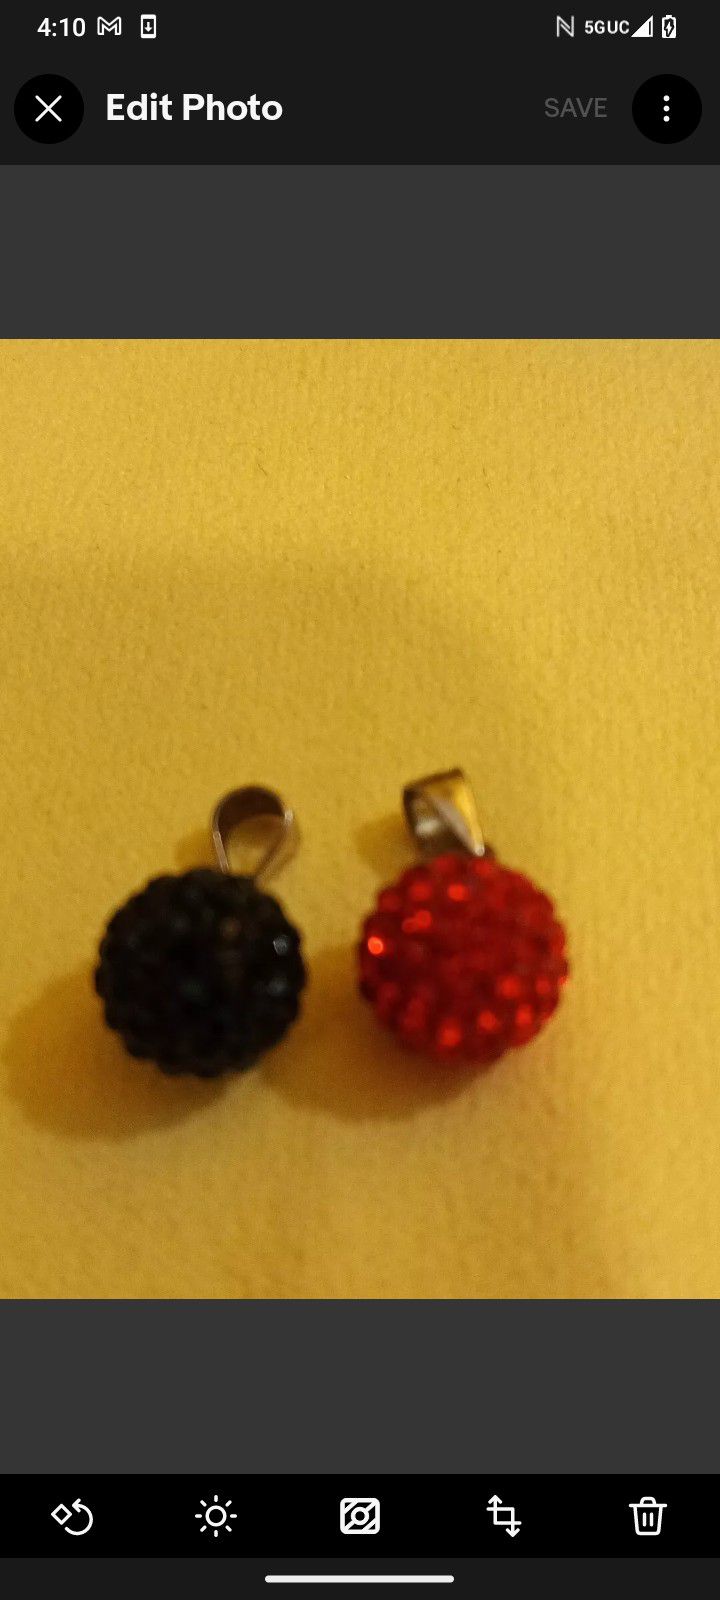 Brand New Set Of 2 Sterling Silver Stamped Embellished Round 2 Pendants Red & Black Fits All Chains Comes W/ Box or Pouch 